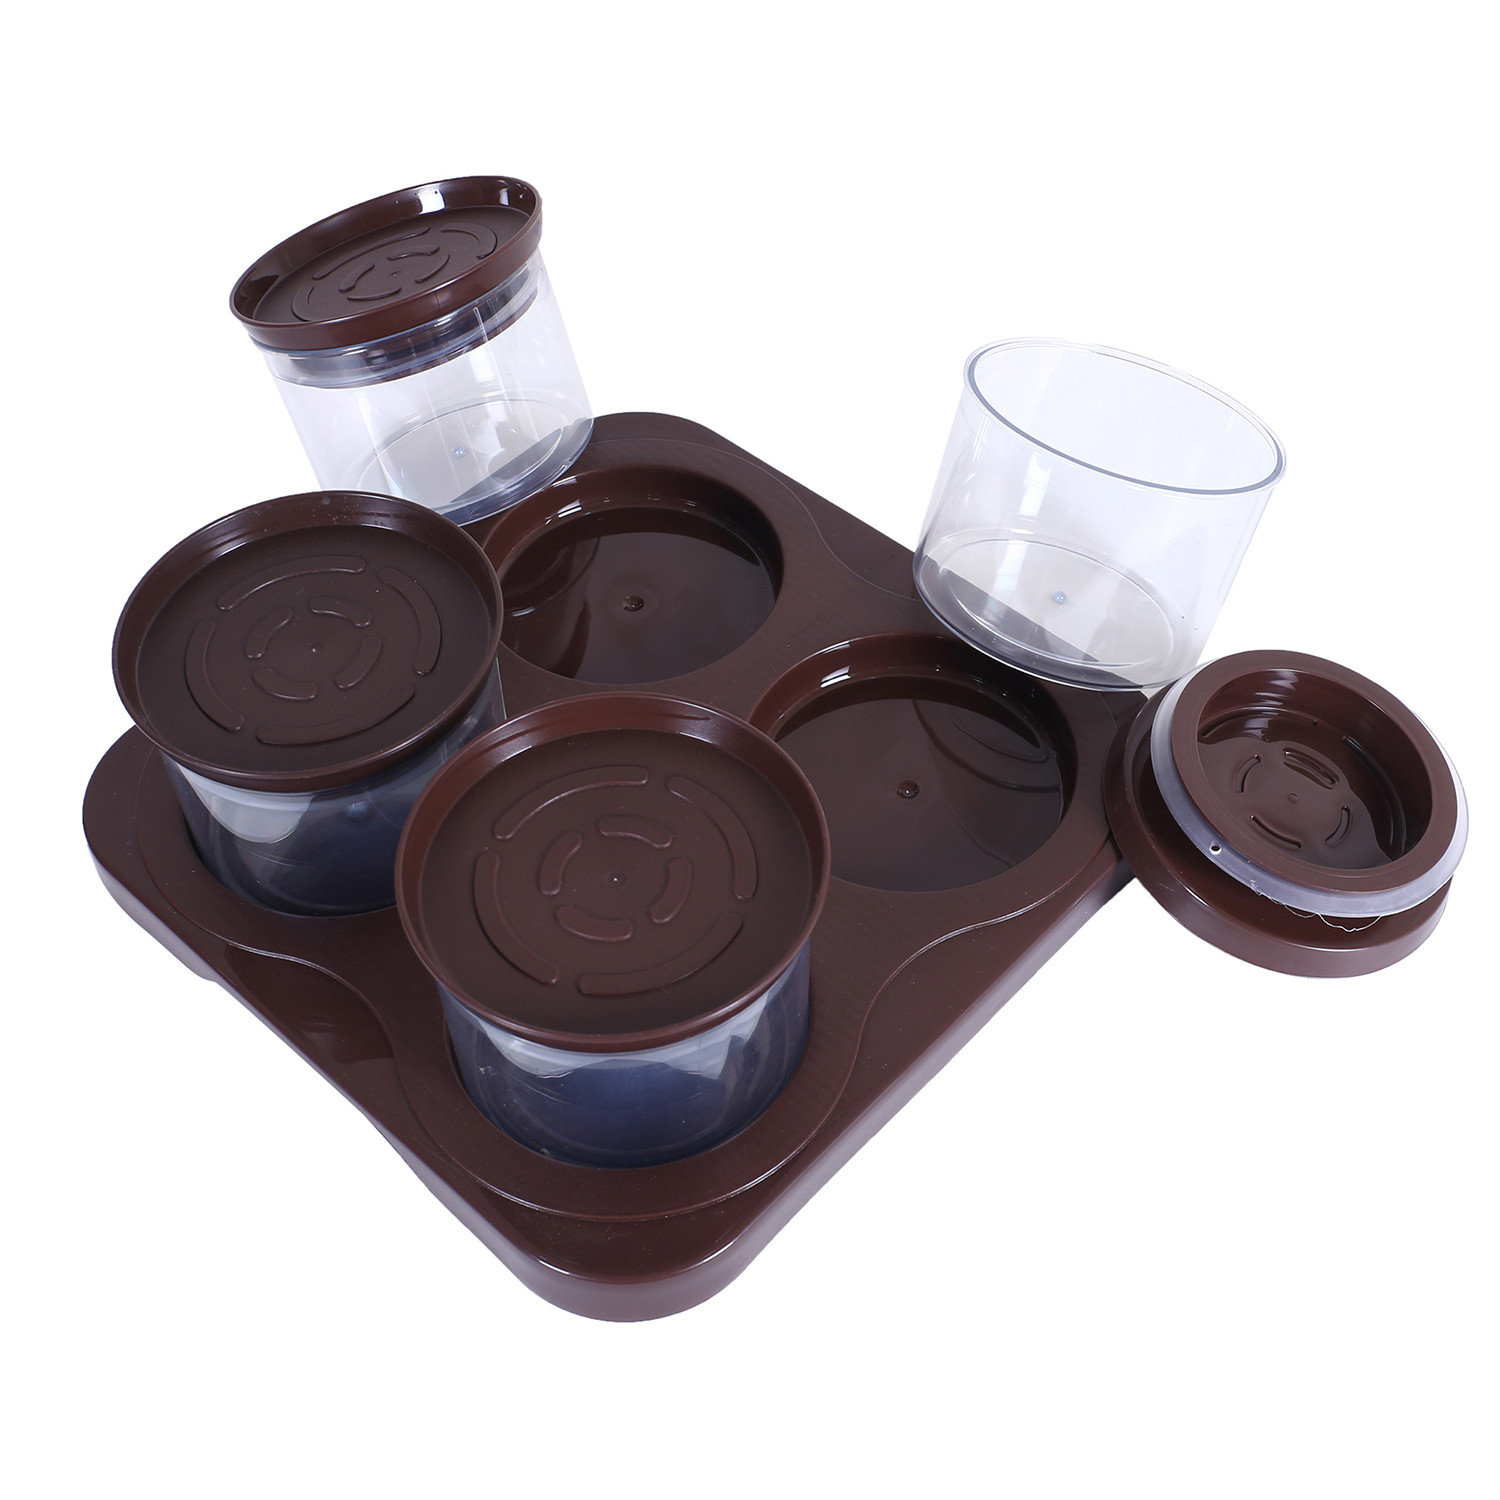 Kuber Industries 4 Containers & Tray Set|Unbreakable Plastic Snackers,Cookies,Nuts Serving Tray|Airtight Containers with Lid,350 ml (Brown)